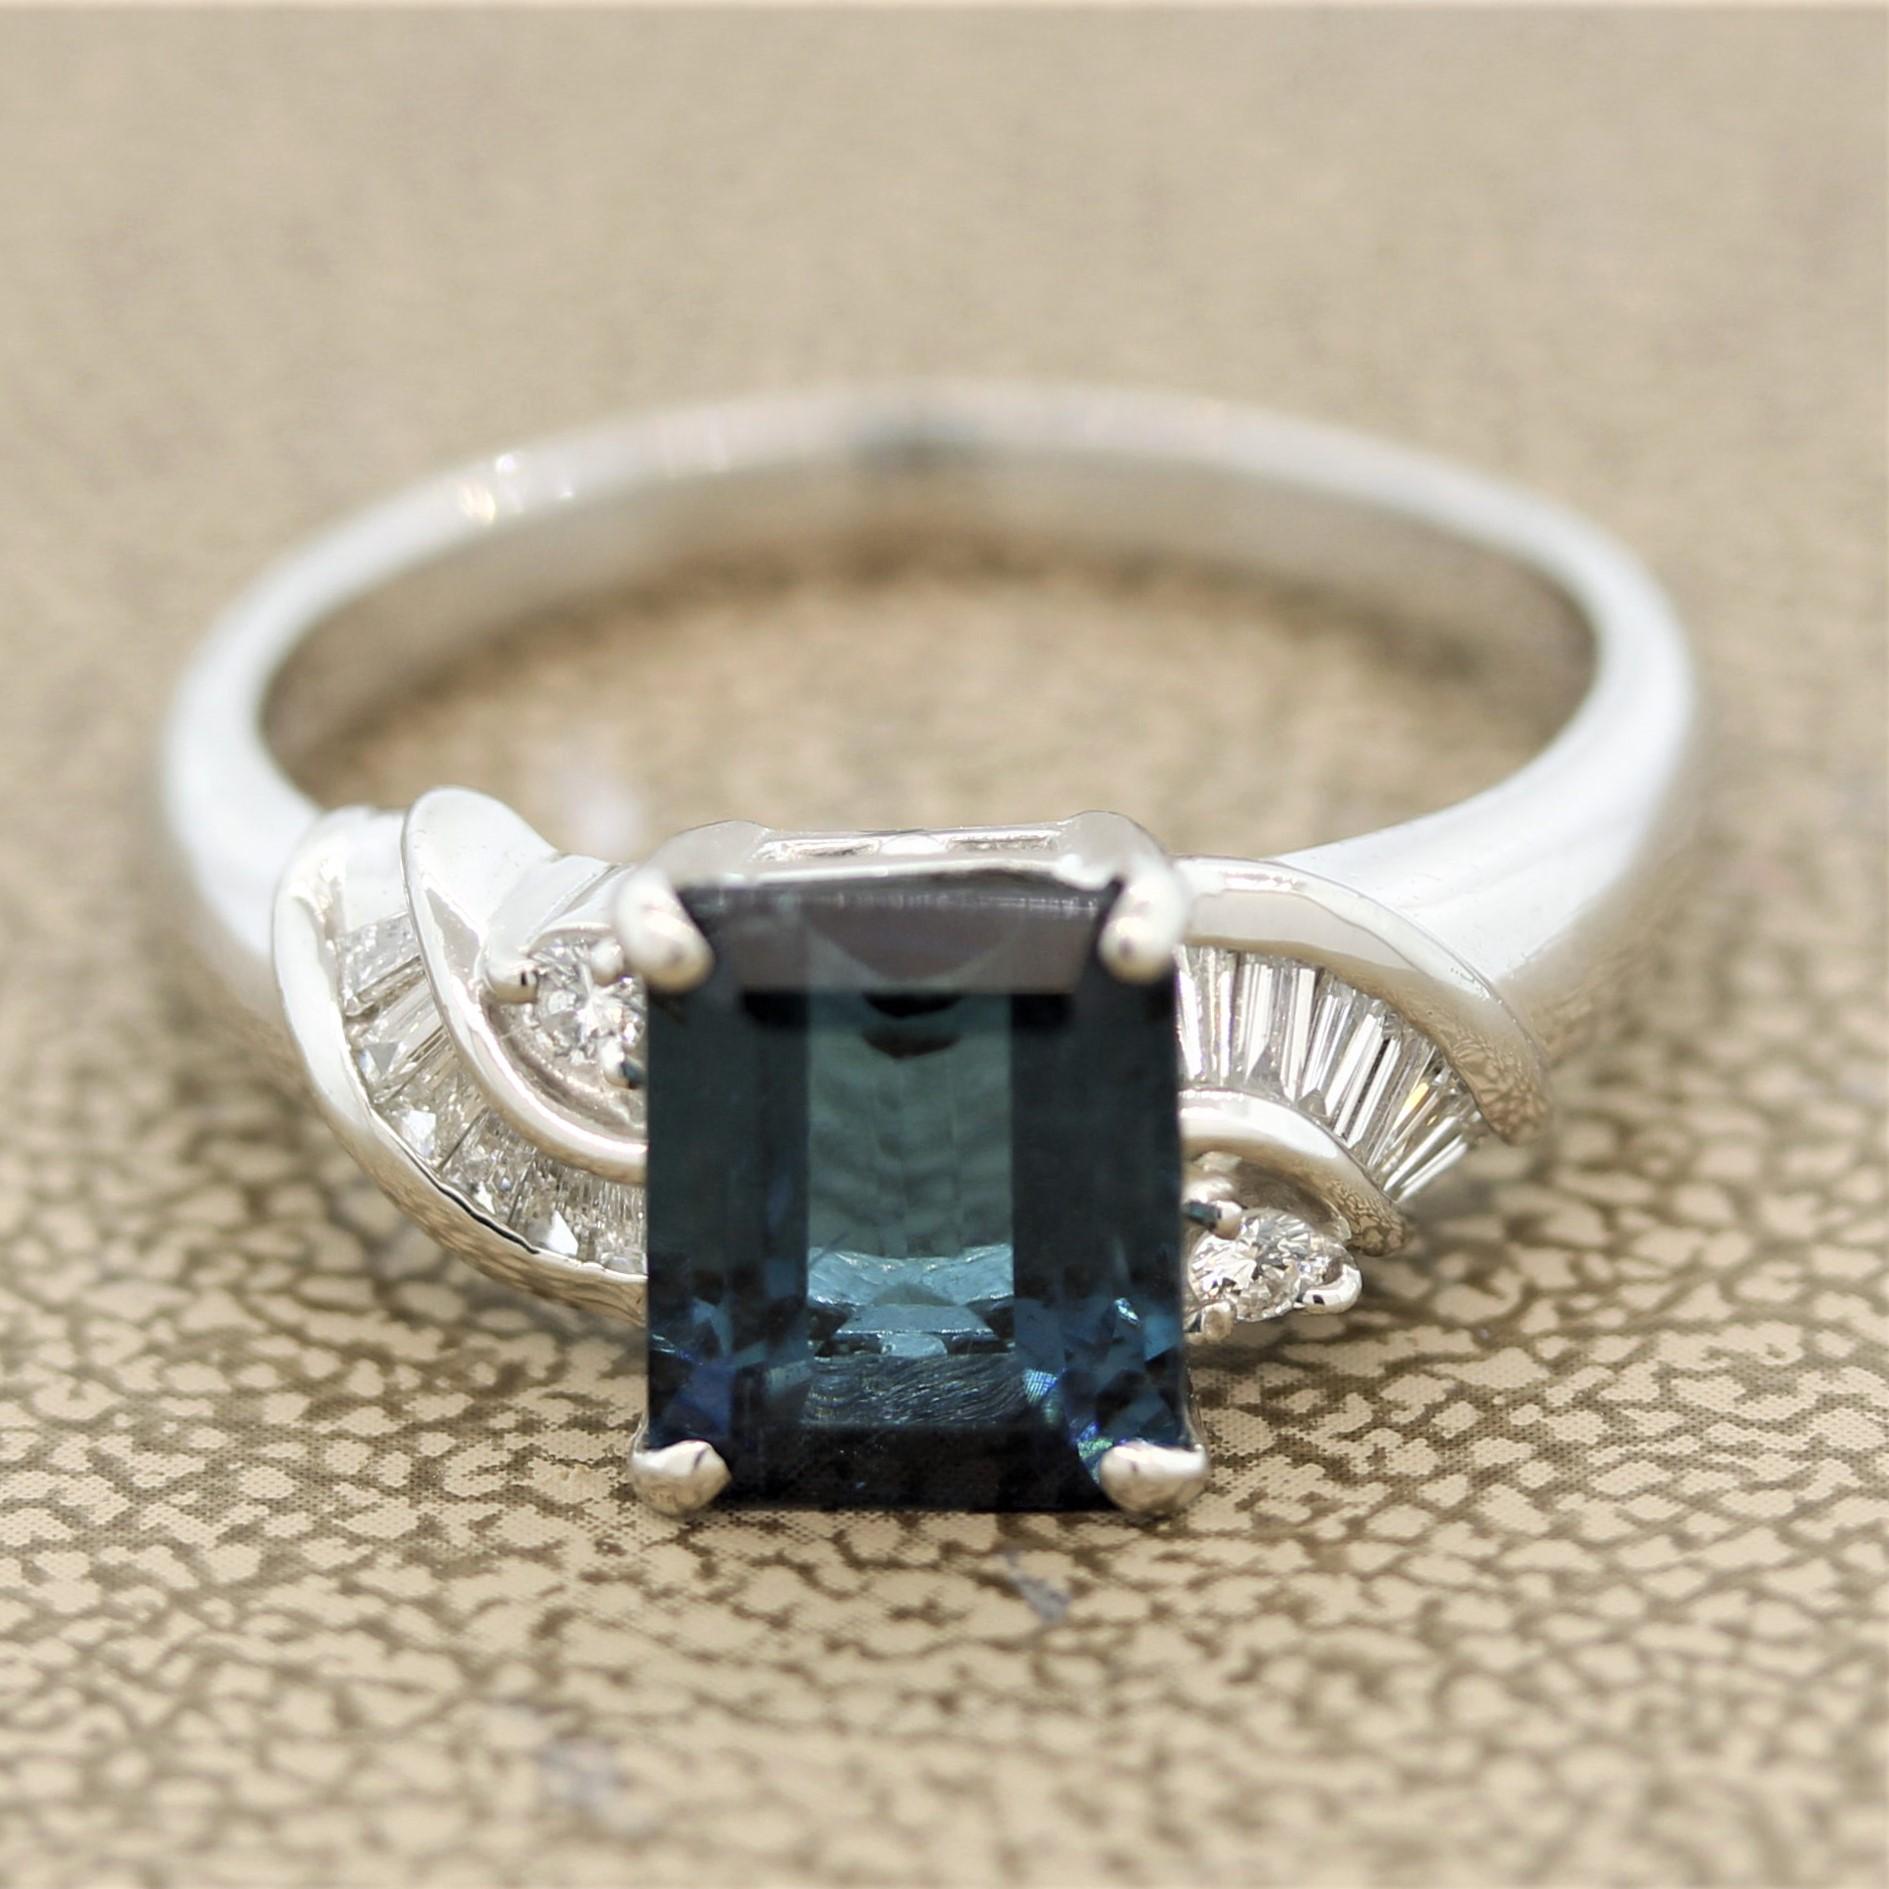 A fine indicolite tourmaline takes center stage of this cute and stylish ring. It weighs 2.55 carats and has a deep rich blue color giving it the trade name “indicolite.” It is accented by 0.22 carats of round brilliant and baguette cut diamonds